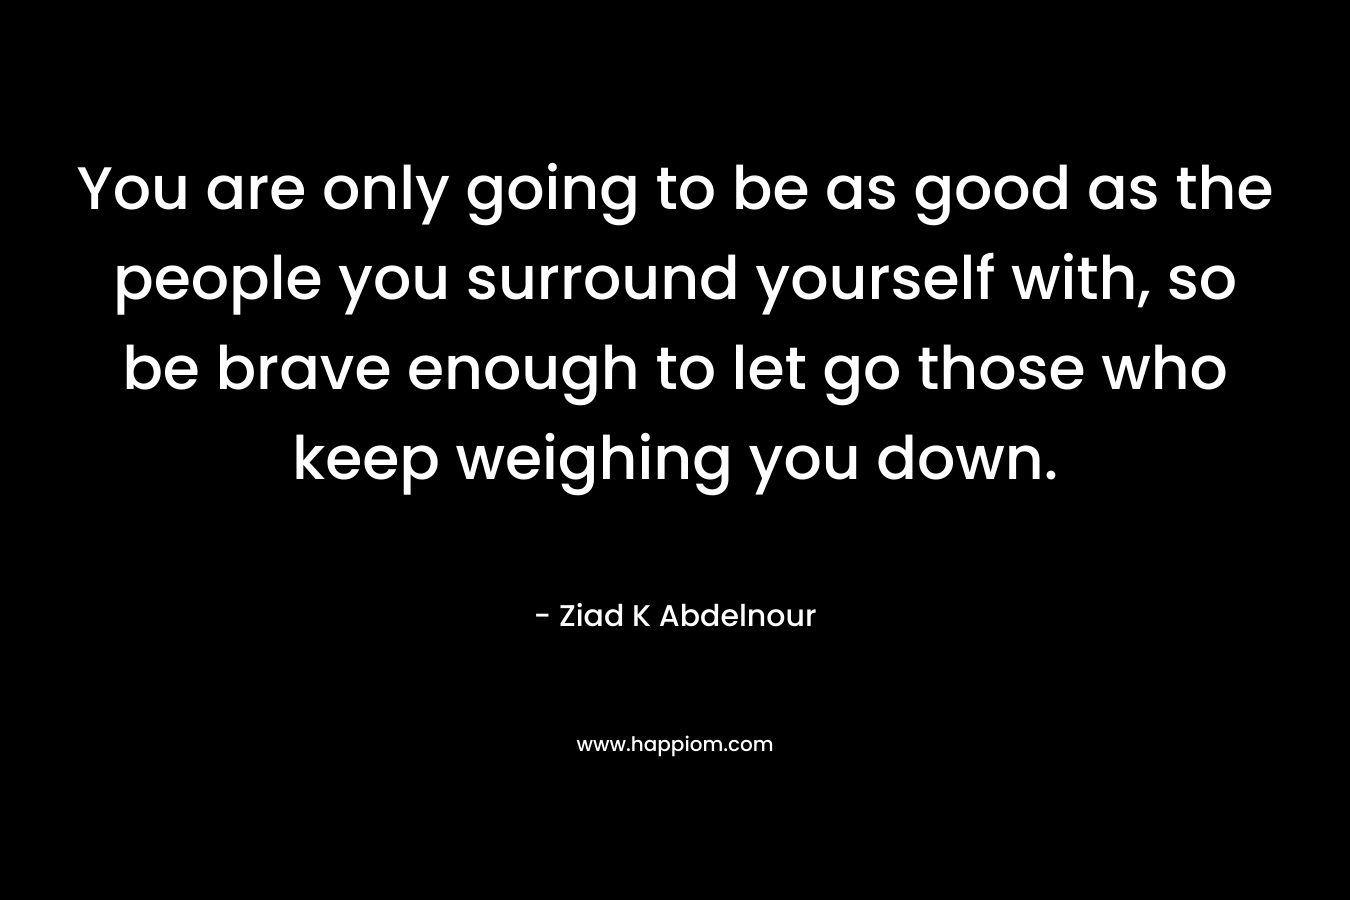 You are only going to be as good as the people you surround yourself with, so be brave enough to let go those who keep weighing you down.